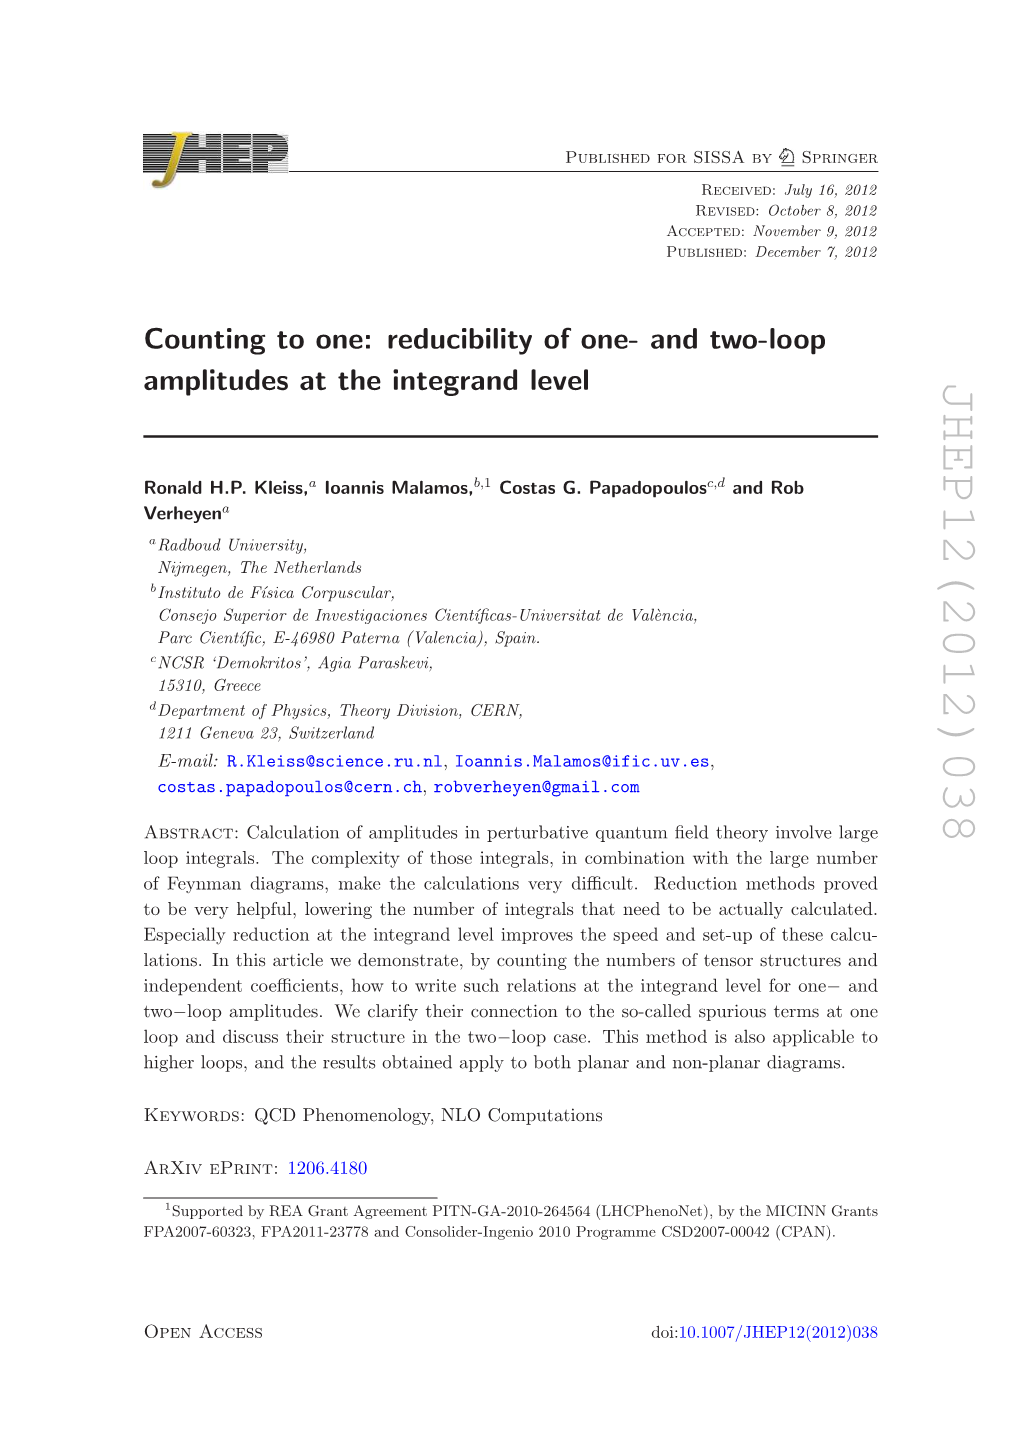 Counting to One: Reducibility of One-And Two-Loop Amplitudes at The